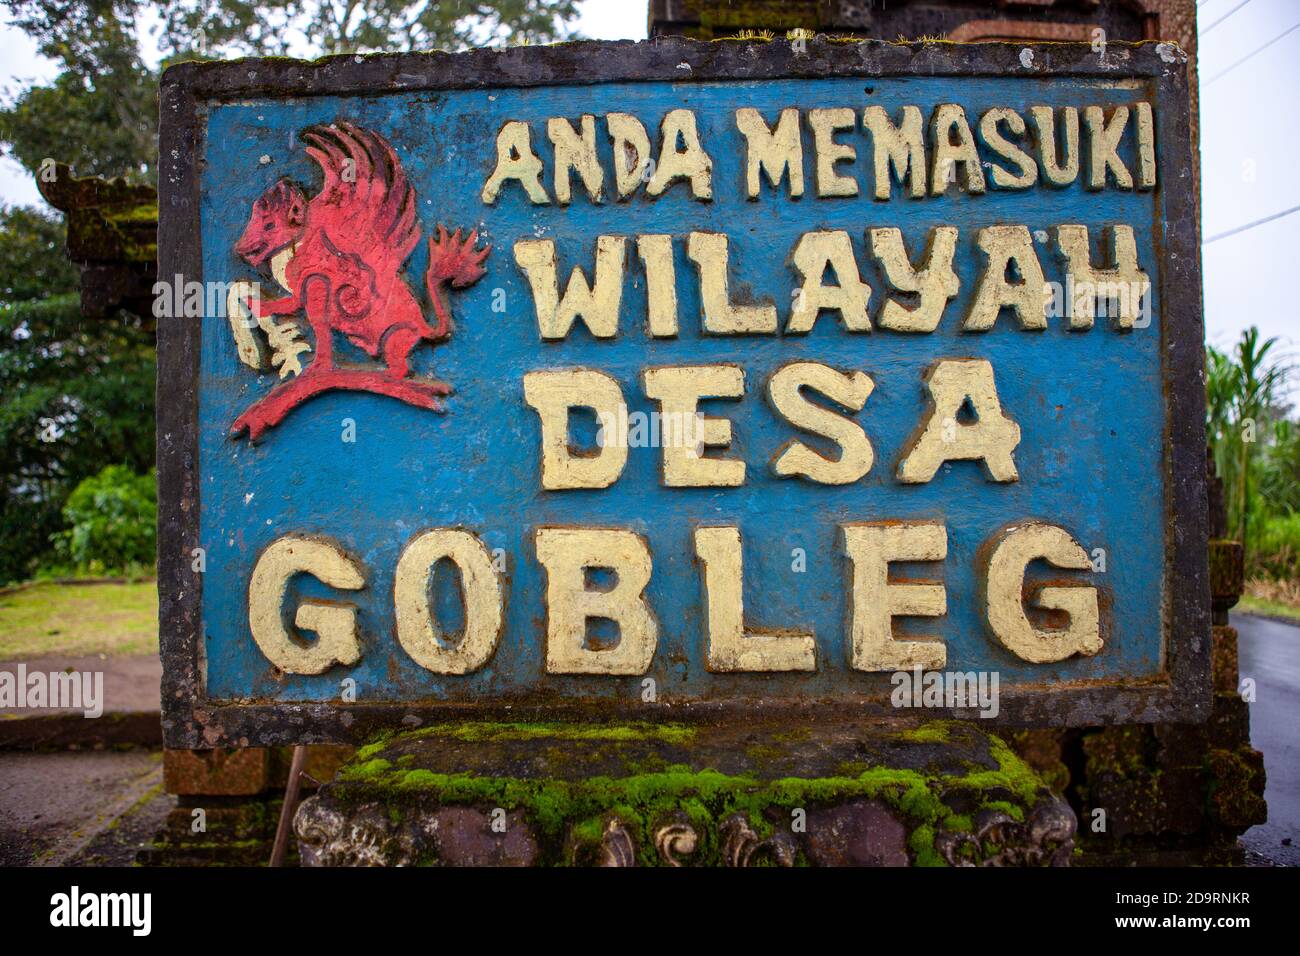 Bali, Indonesia- March 09, 2013. The traditional village of Gobleg in Bali is one of the best preserved traditional villages. Sign at the entrance to Stock Photo